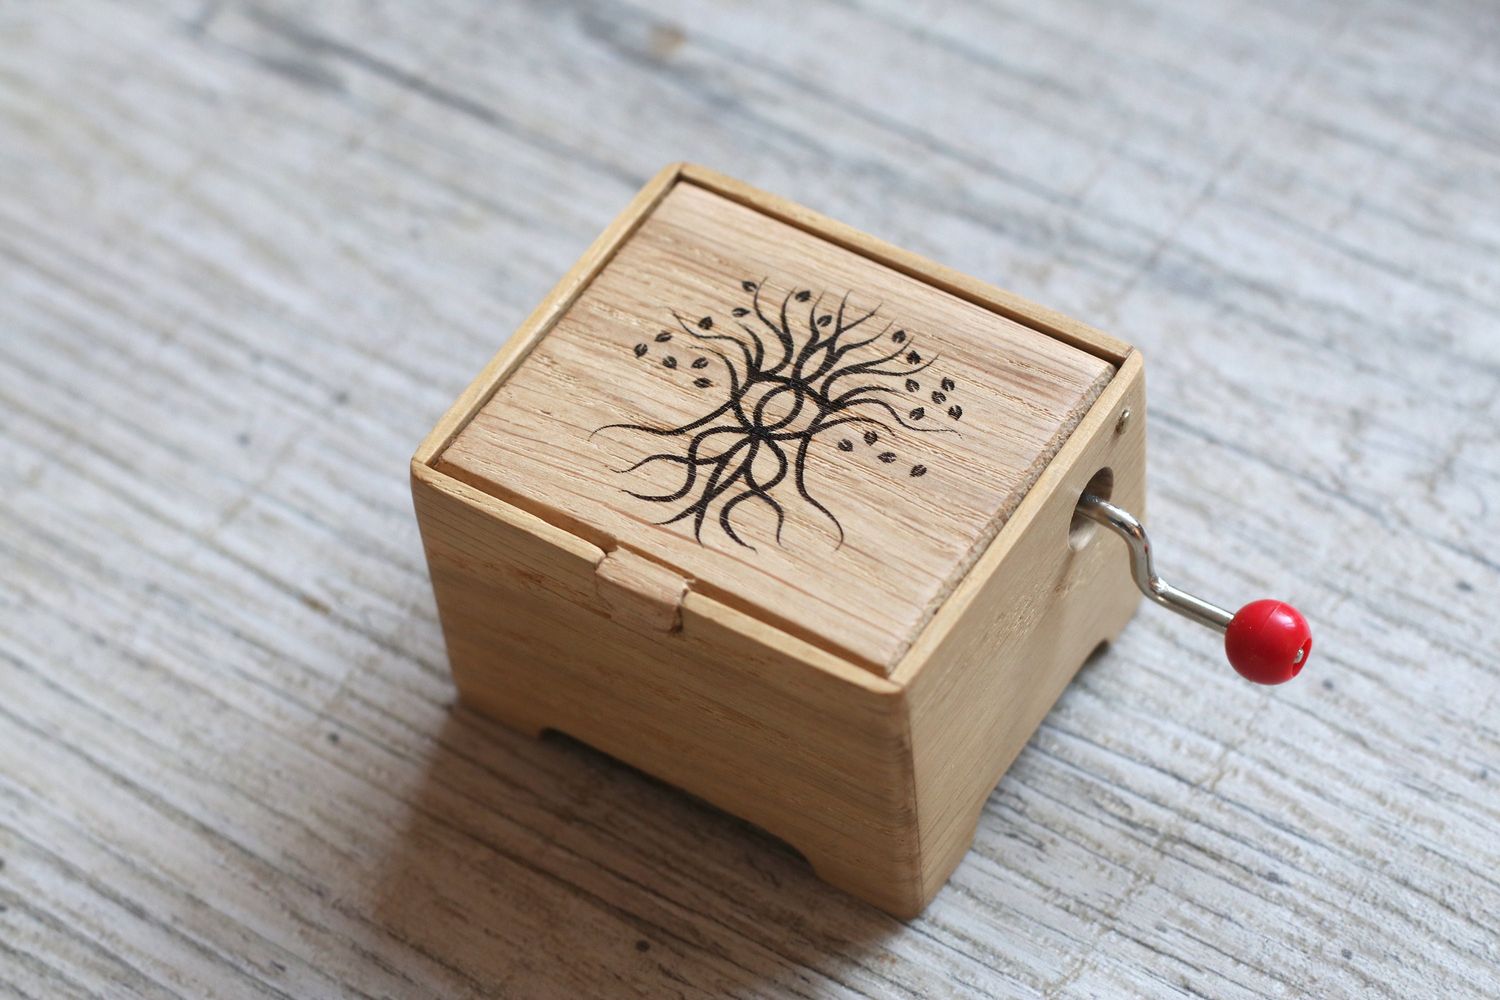 How To Make A Music Box With Wood